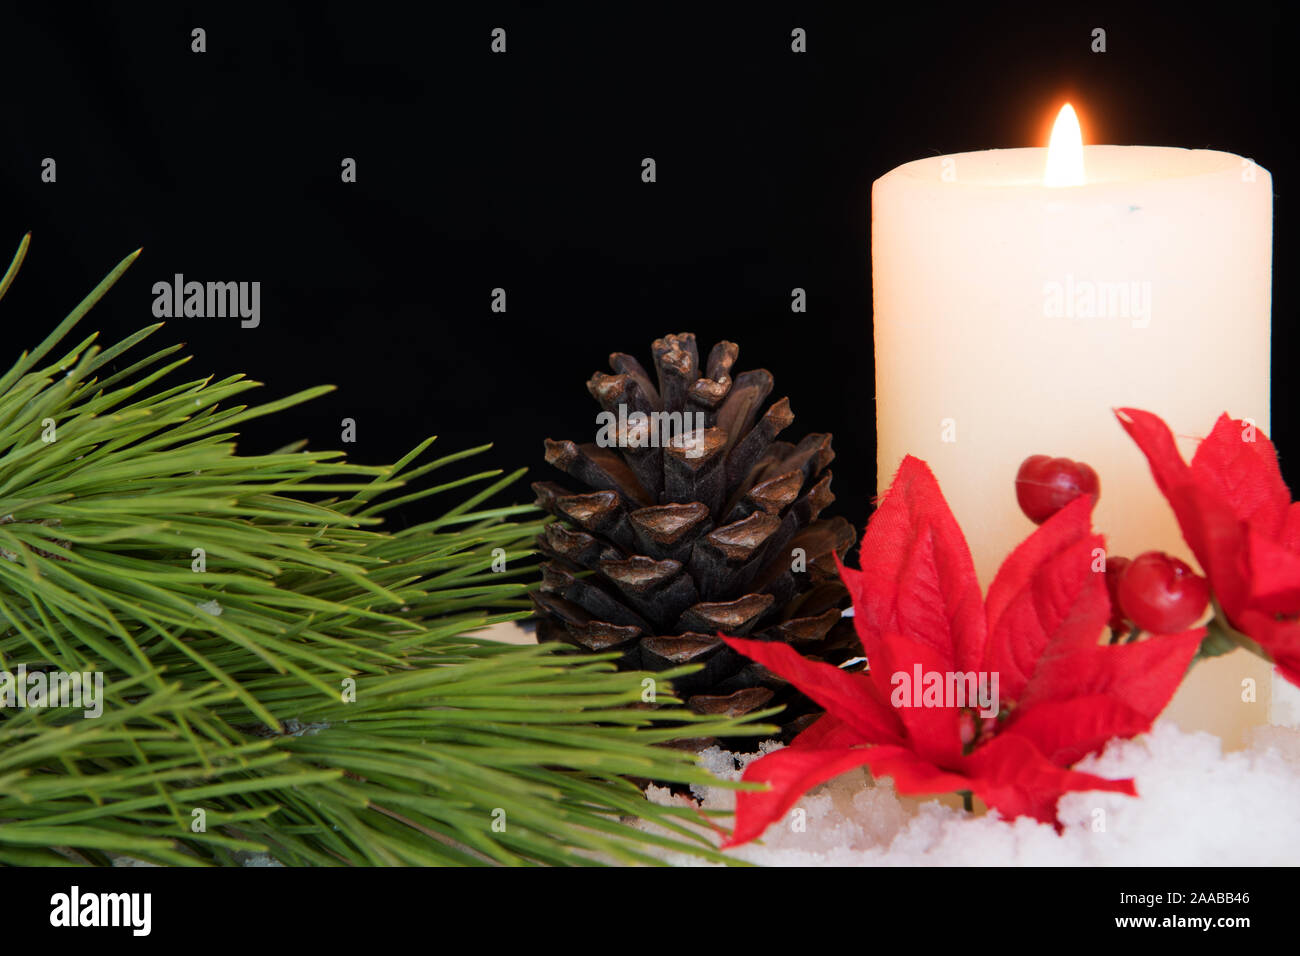 Red Poinsettia flower with lit white candle, pine needles and pine cones in snow. Black Christmas Background with holiday theme. Stock Photo